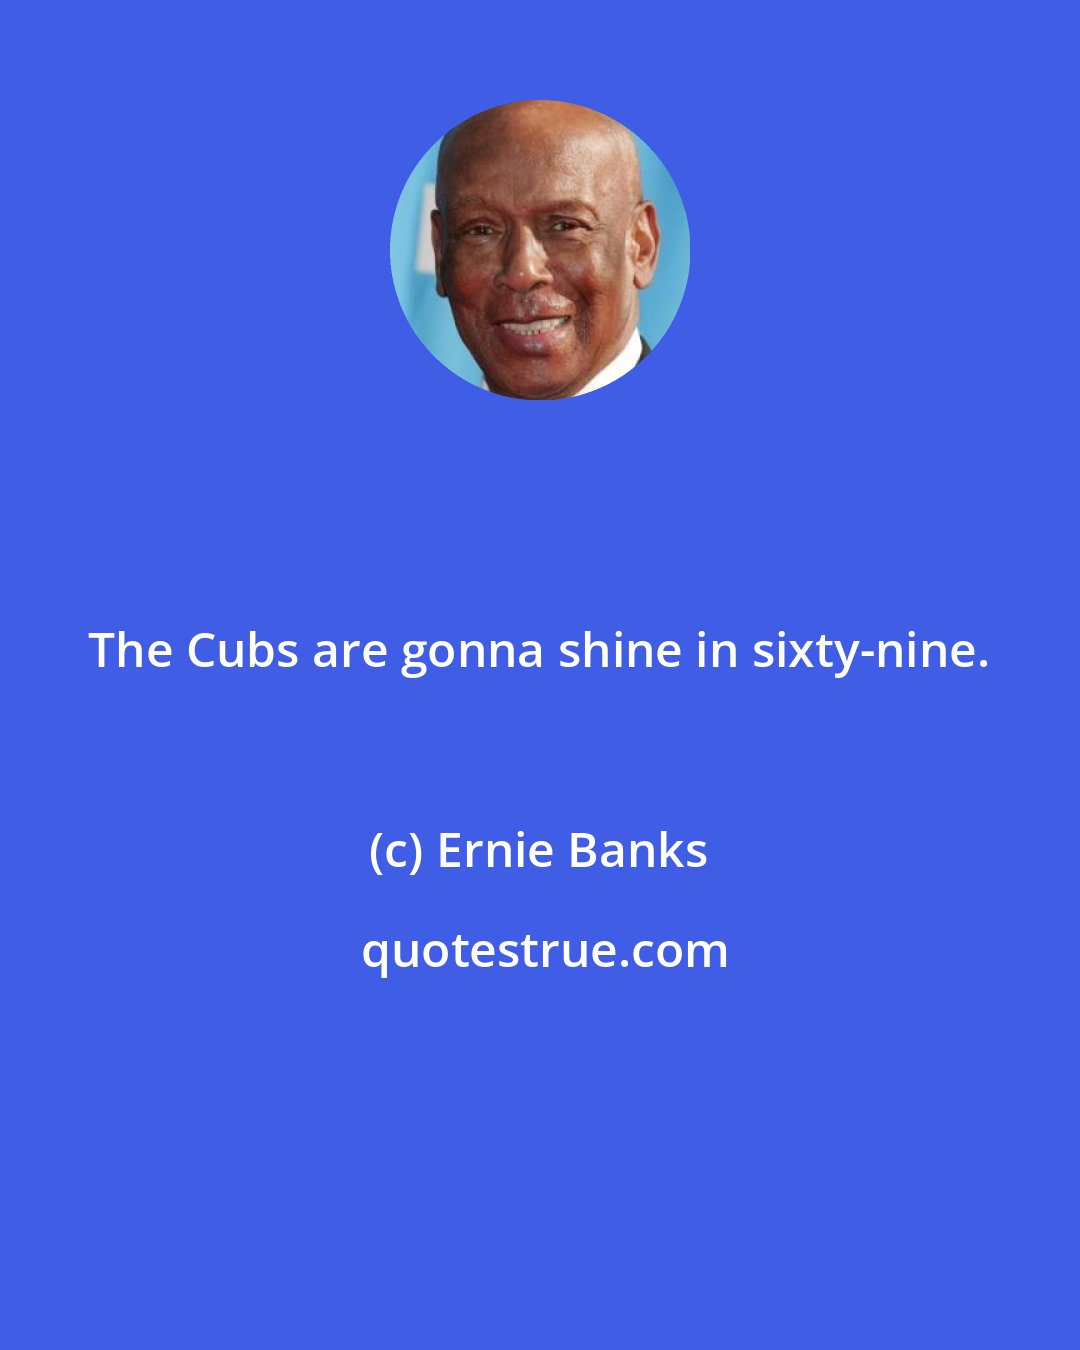 Ernie Banks: The Cubs are gonna shine in sixty-nine.